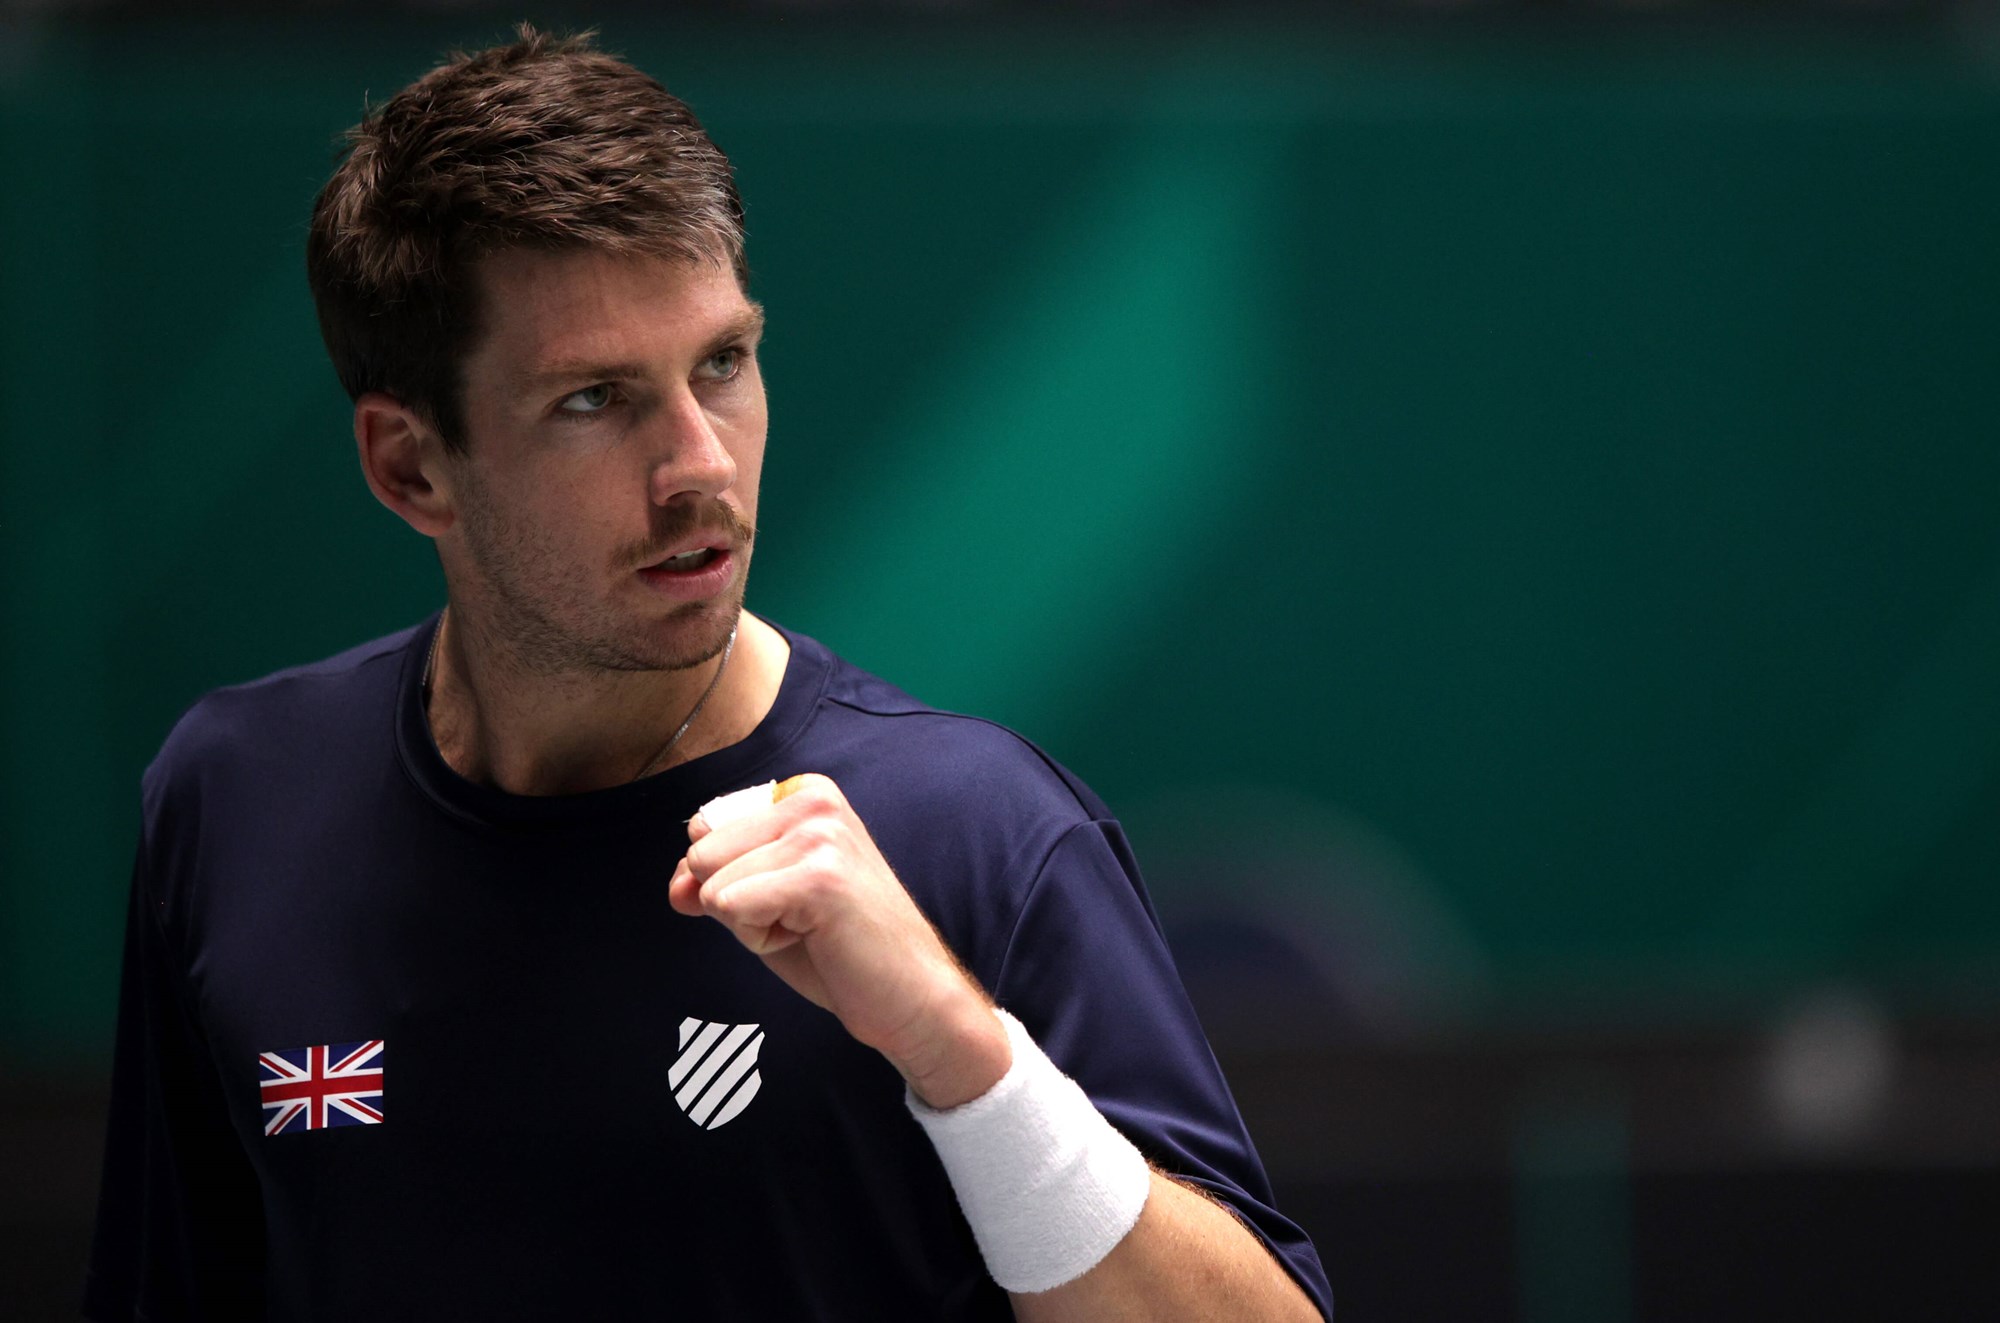 Cam Norrie representing Great Britain at the 2021 Davis Cup Finals